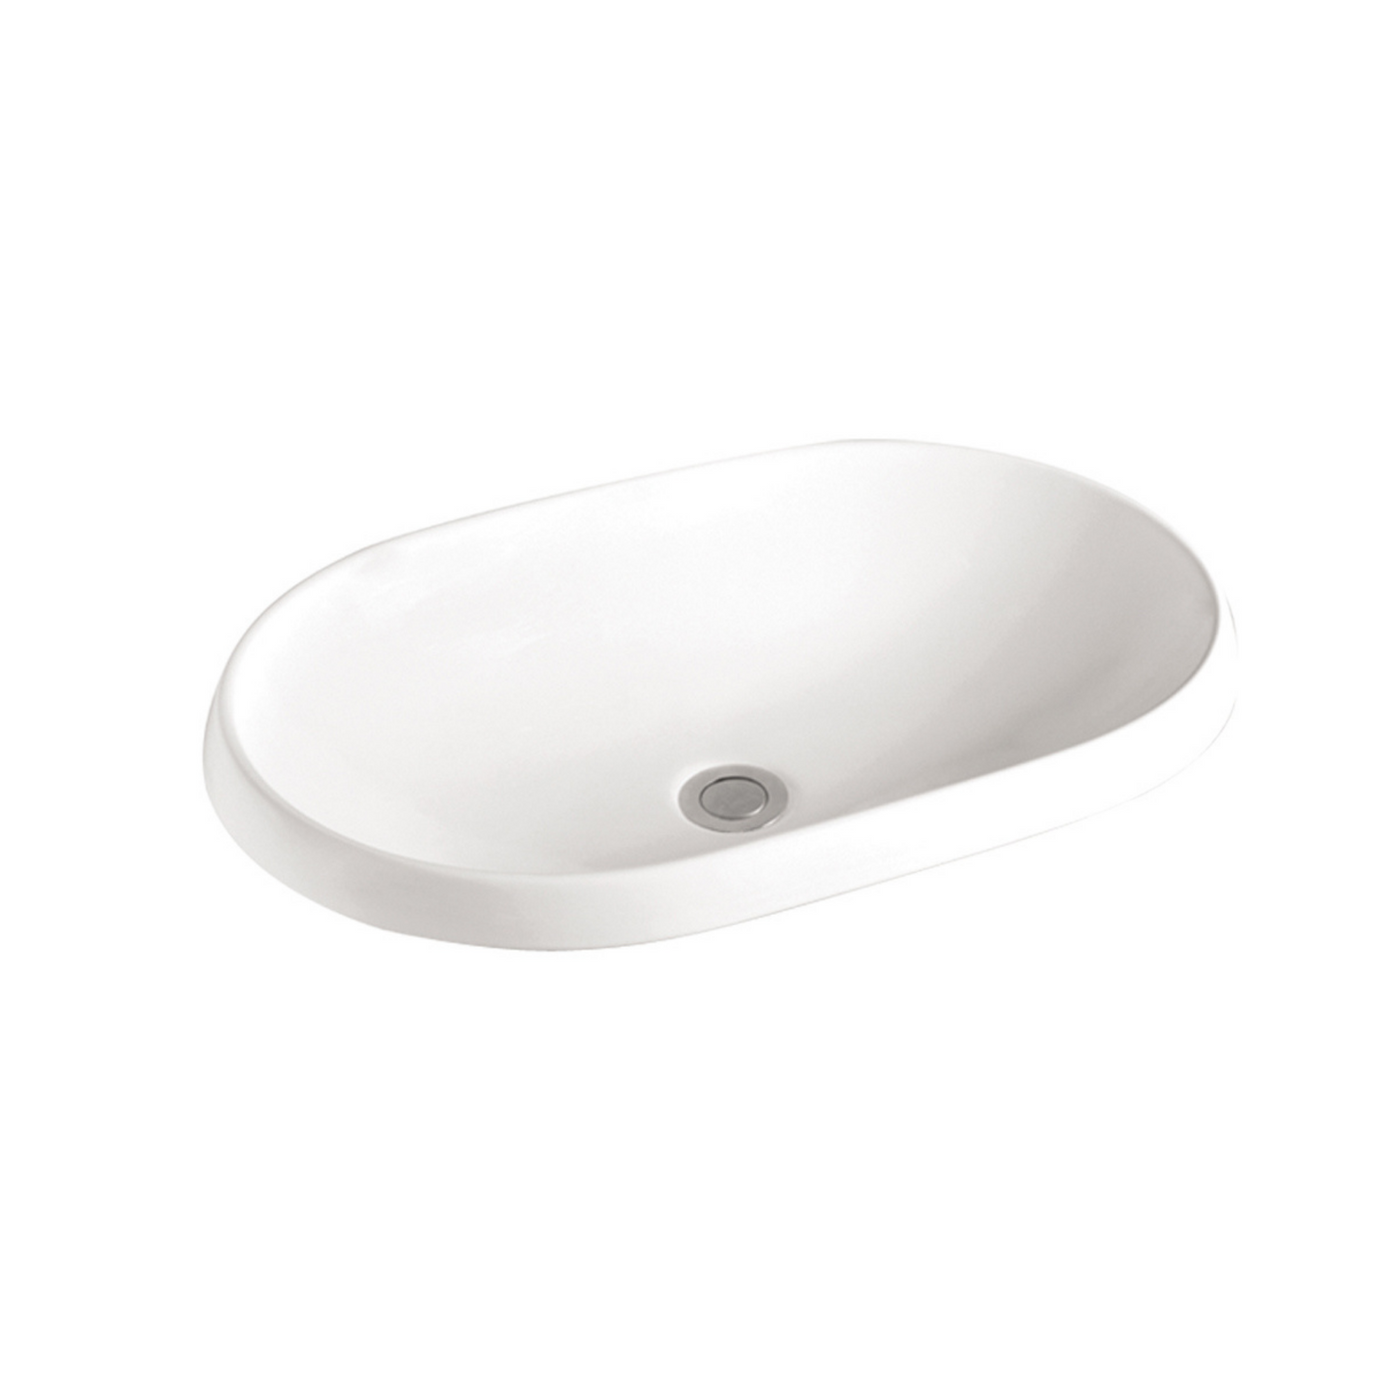 Wide large curvy white sink